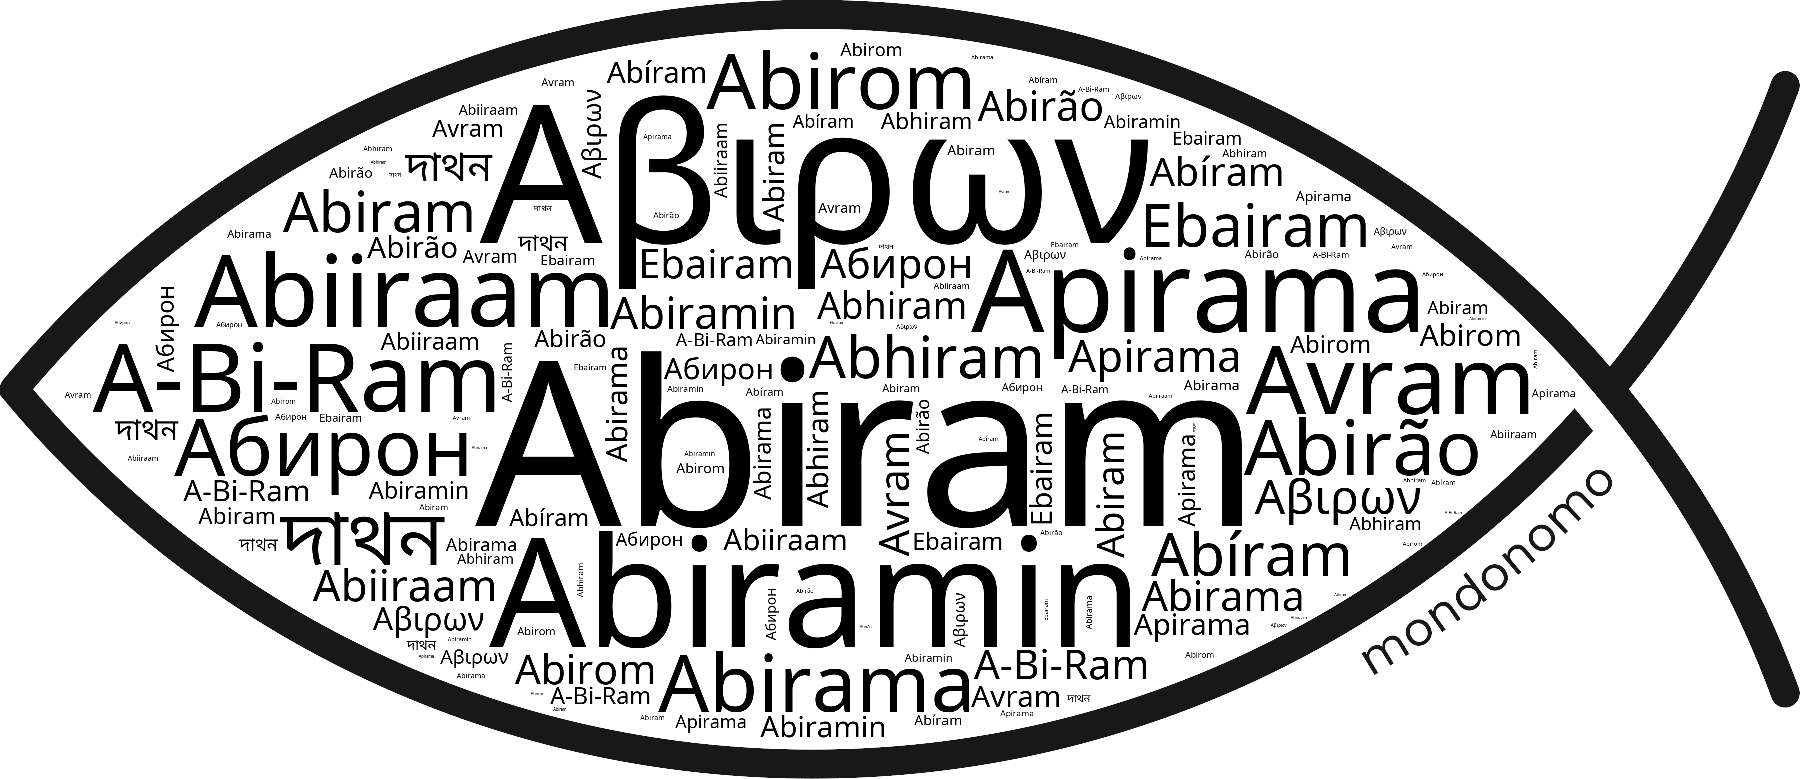 Name Abiram in the world's Bibles